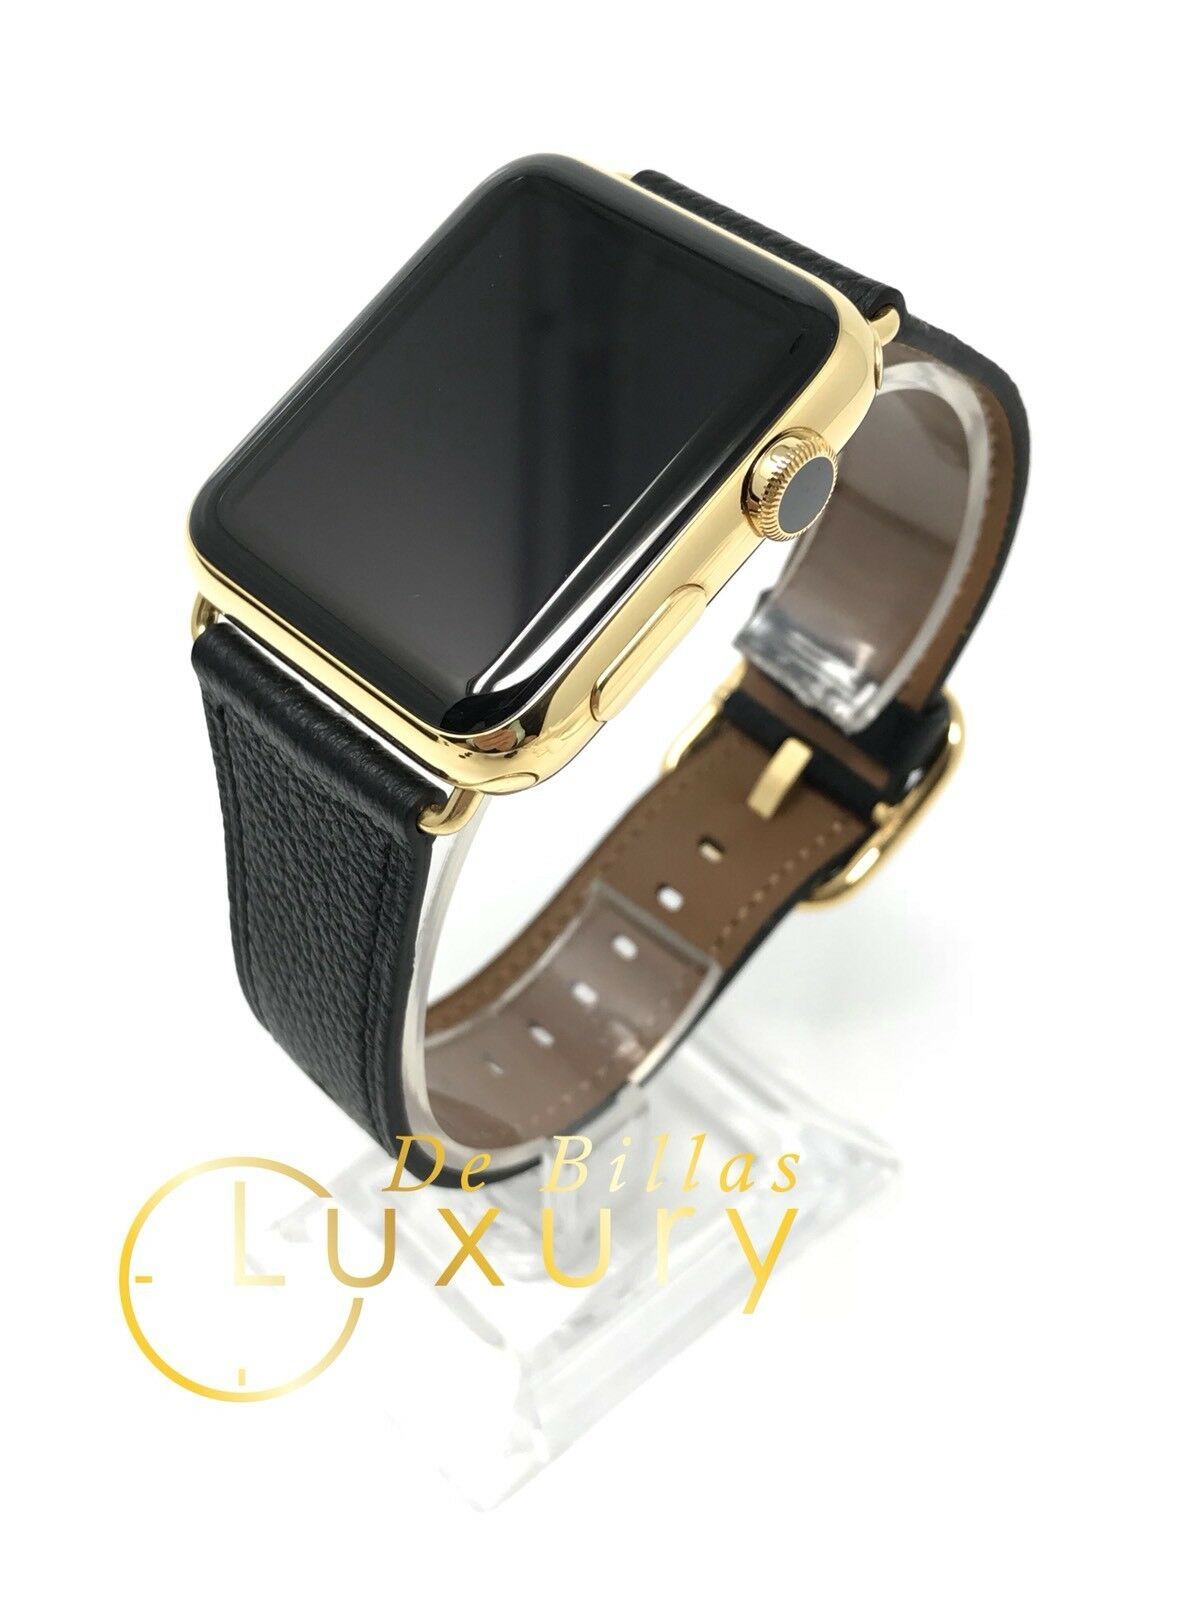 Primary image for 24K Gold Plated 42MM Apple Watch SERIES 2 with Black and Brown Band CUSTOM